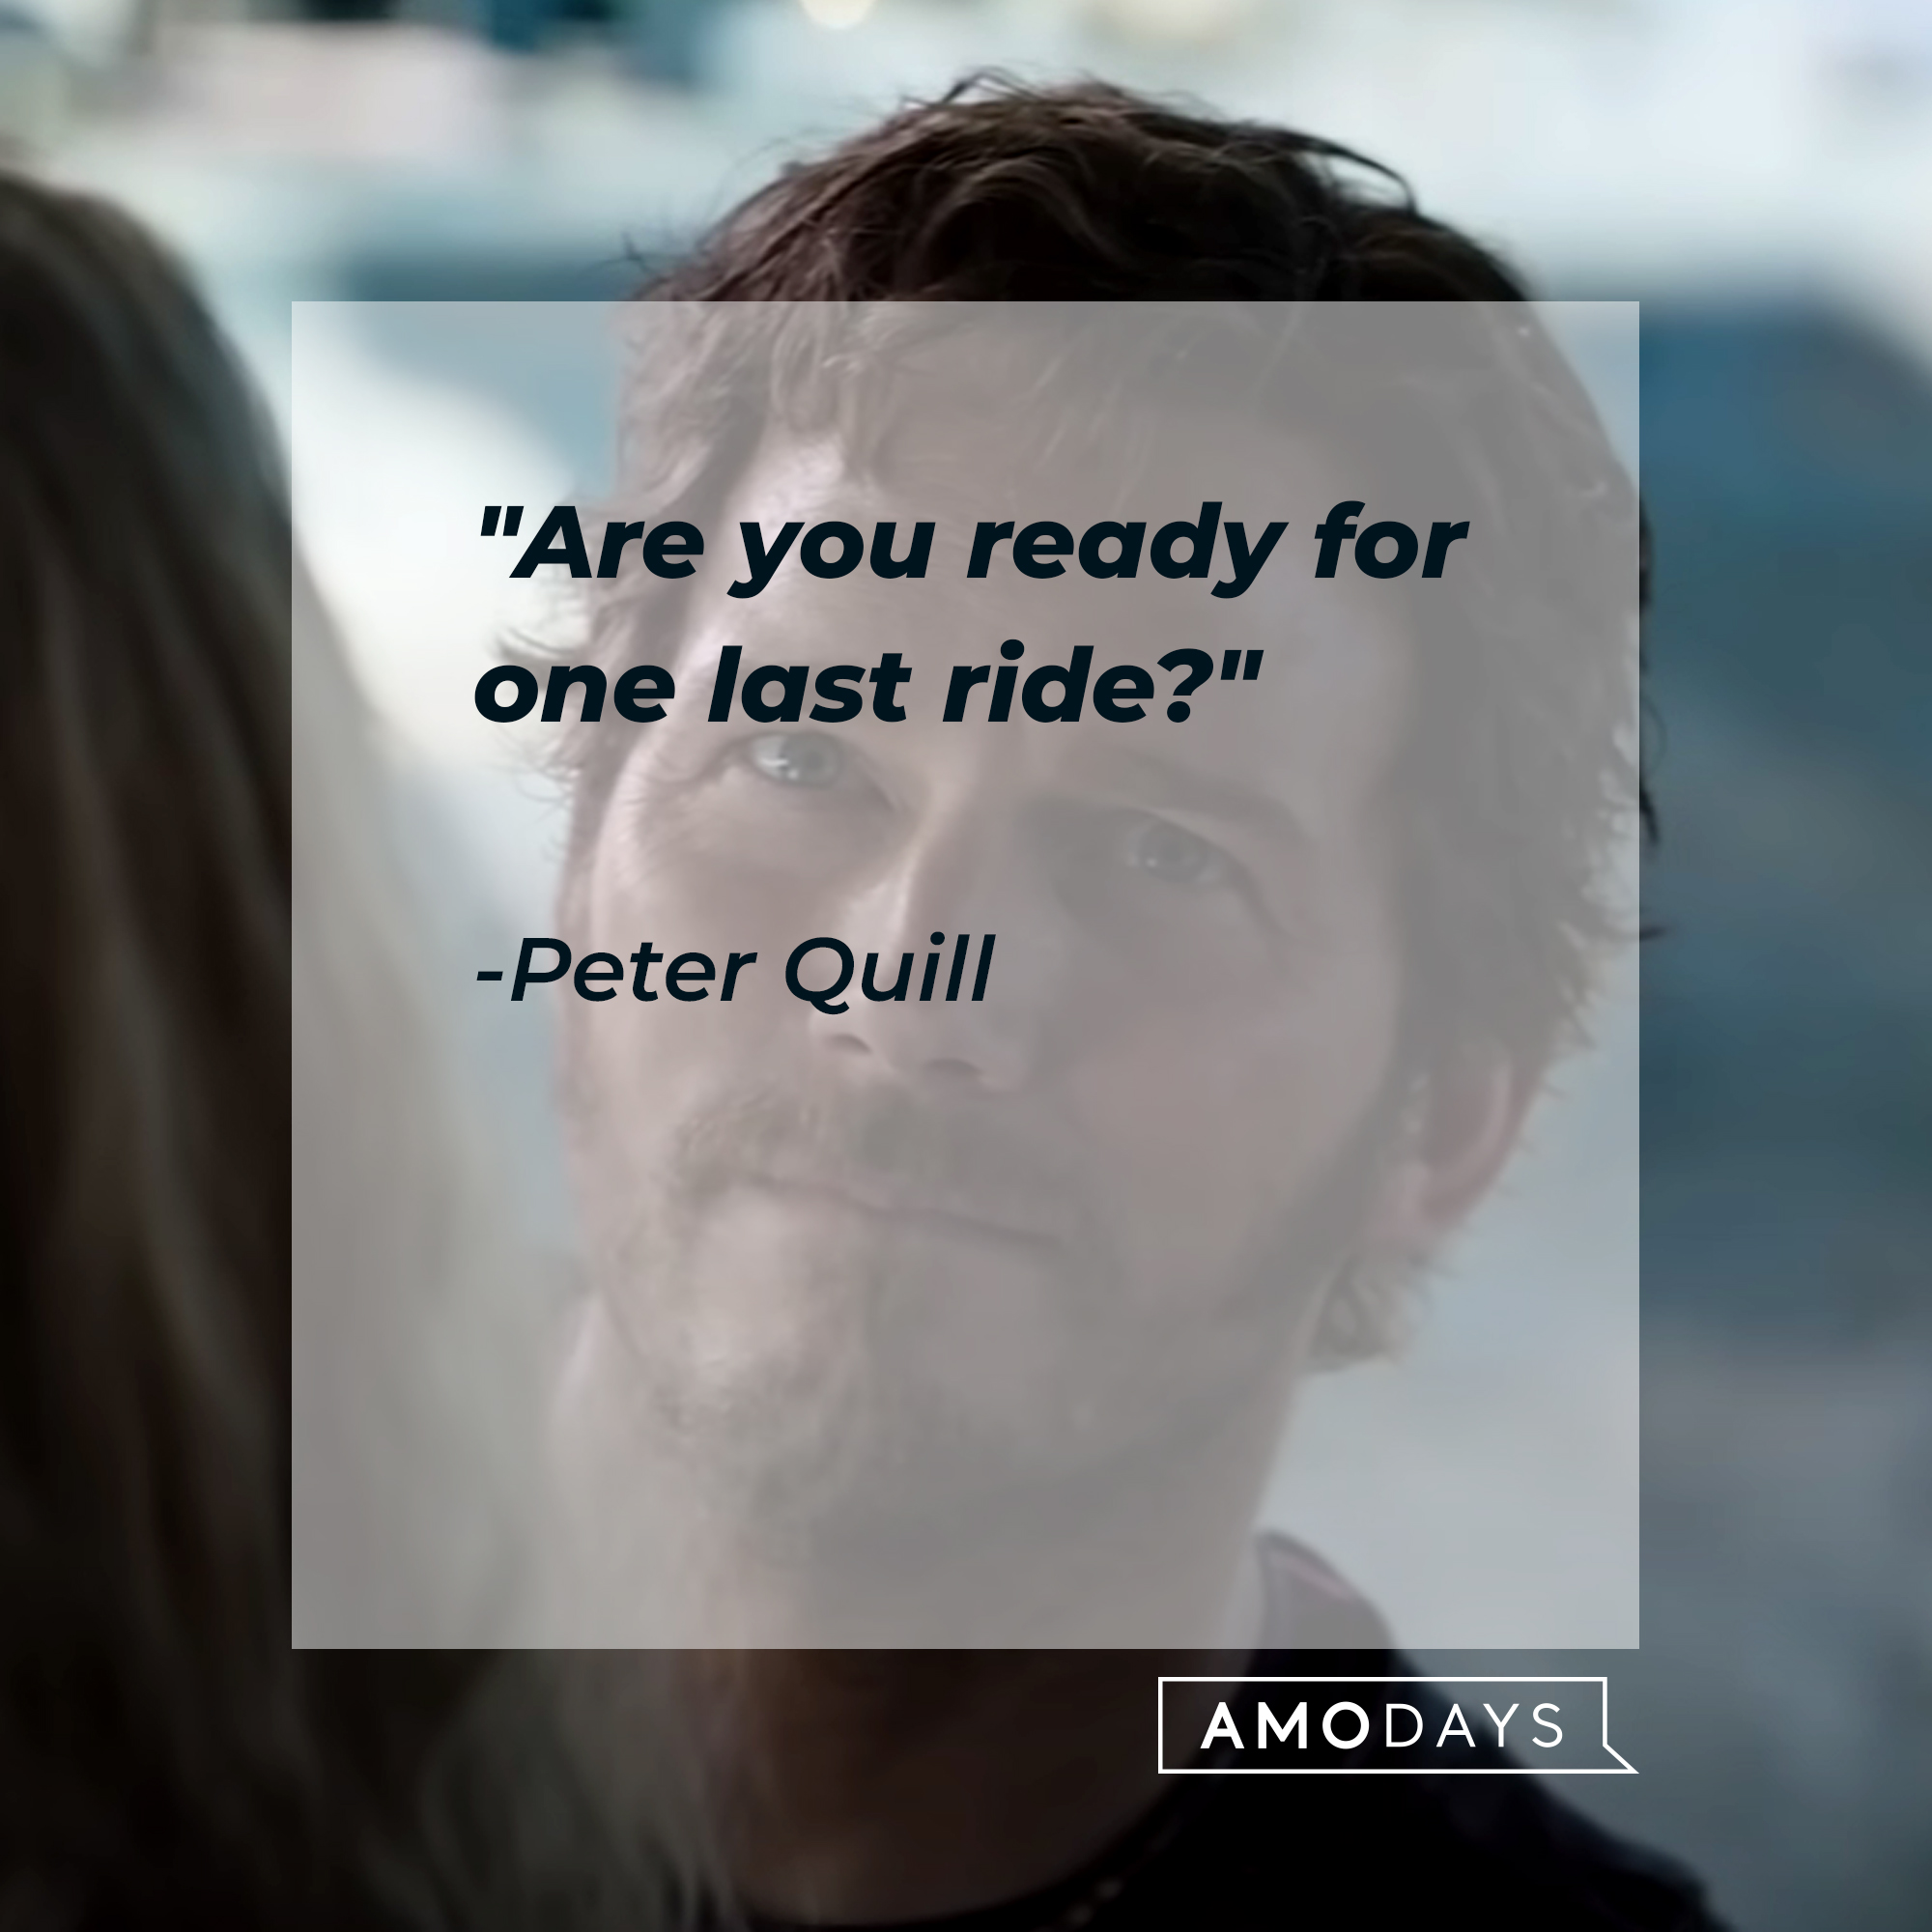 Peter Quill's quote, "Are you ready for one last ride?" | Image: youtube.com/marvel